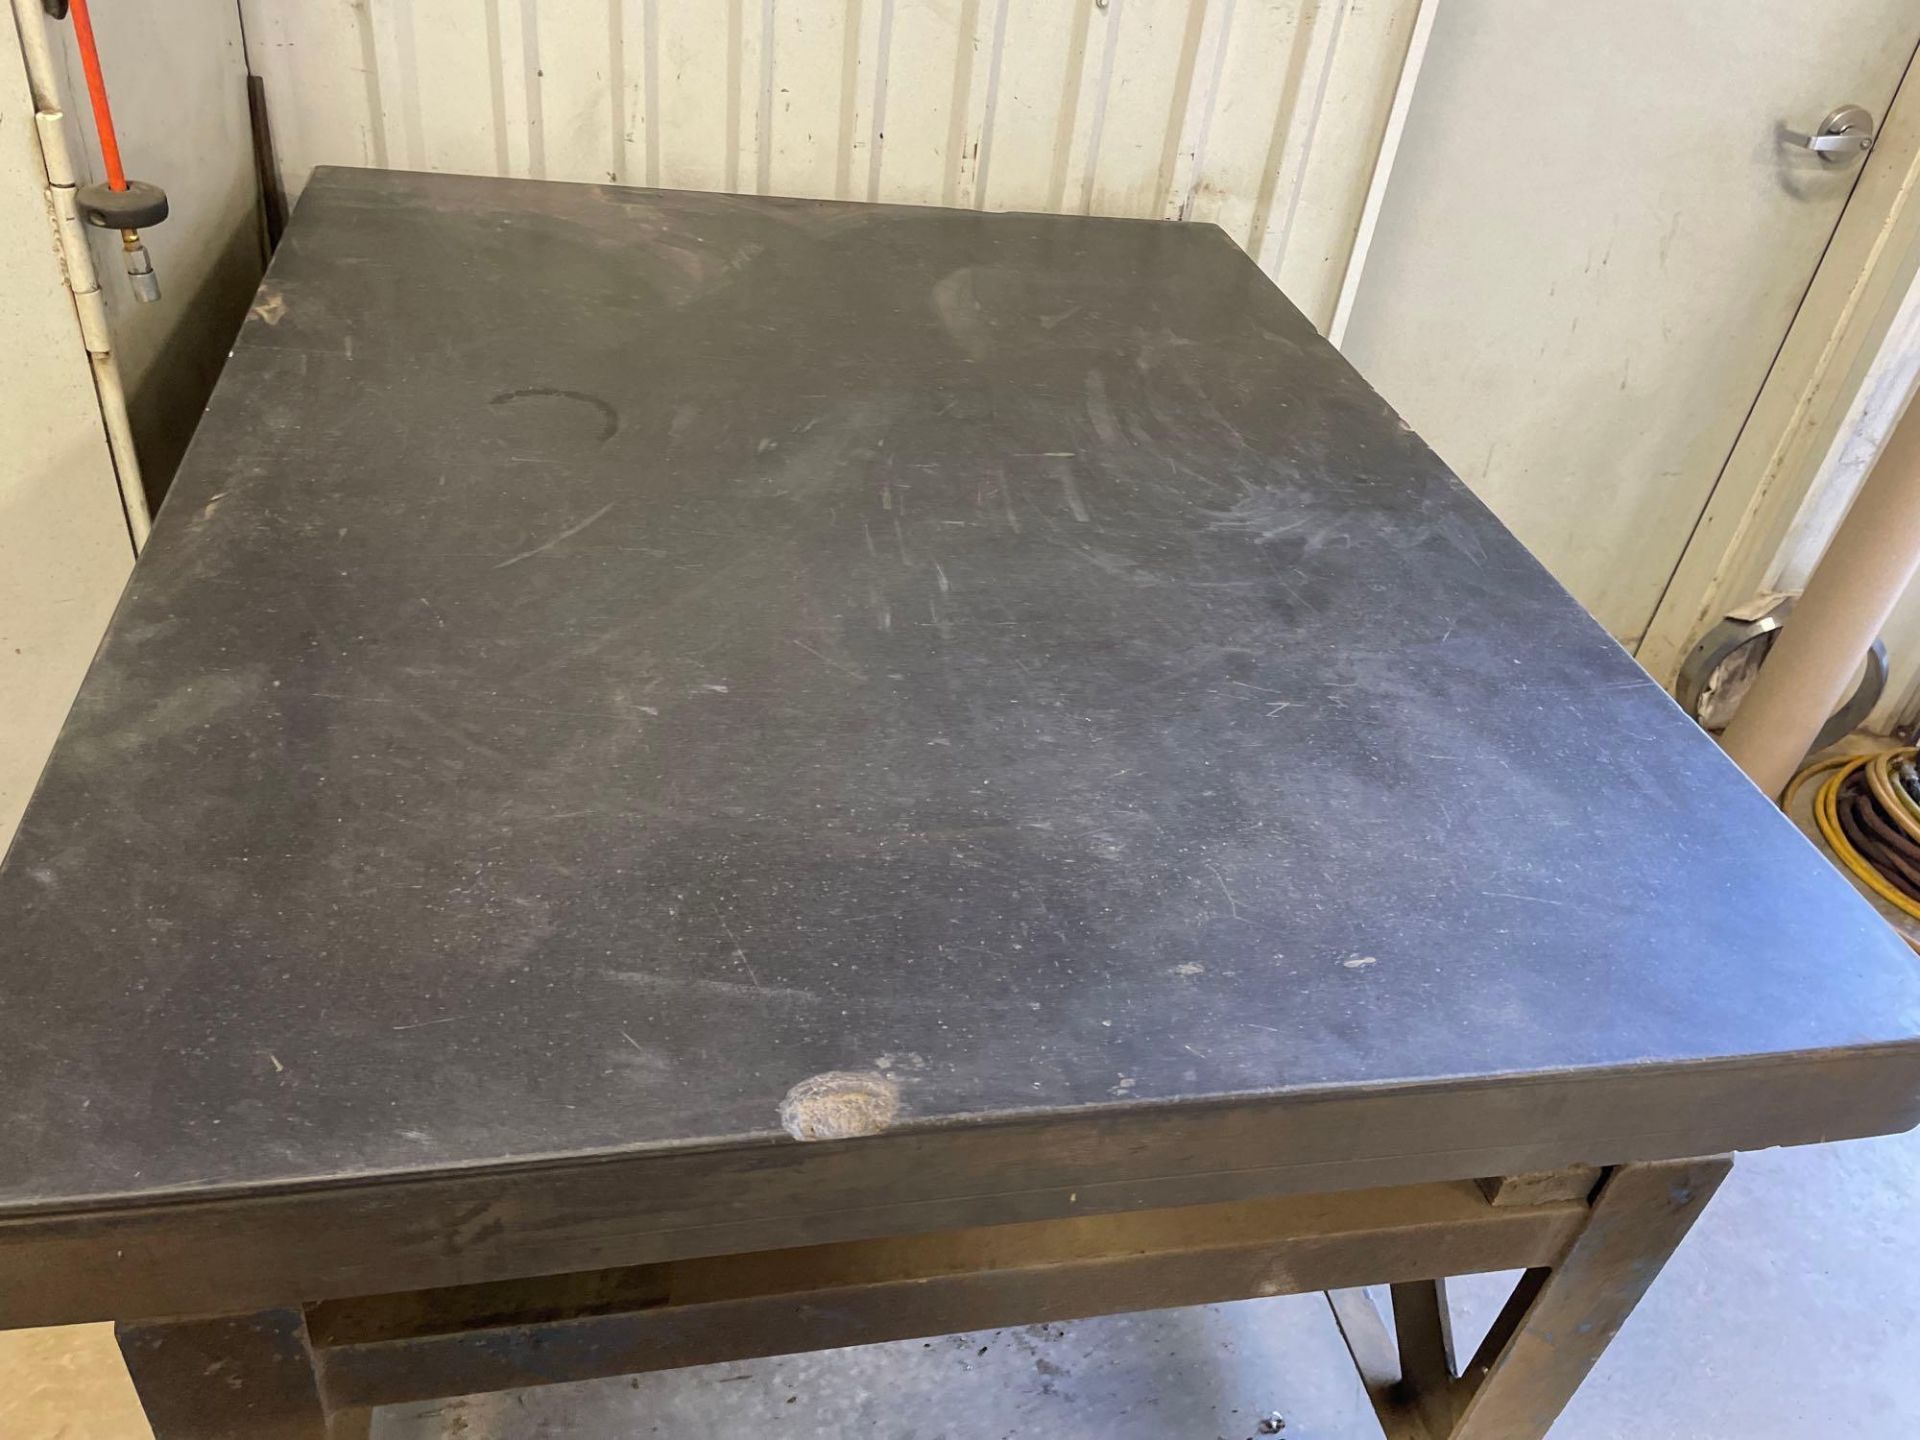 60” X 48” X 4” Granite Table on Heavy Duty Metal Base Overall Height 35” - Image 4 of 6